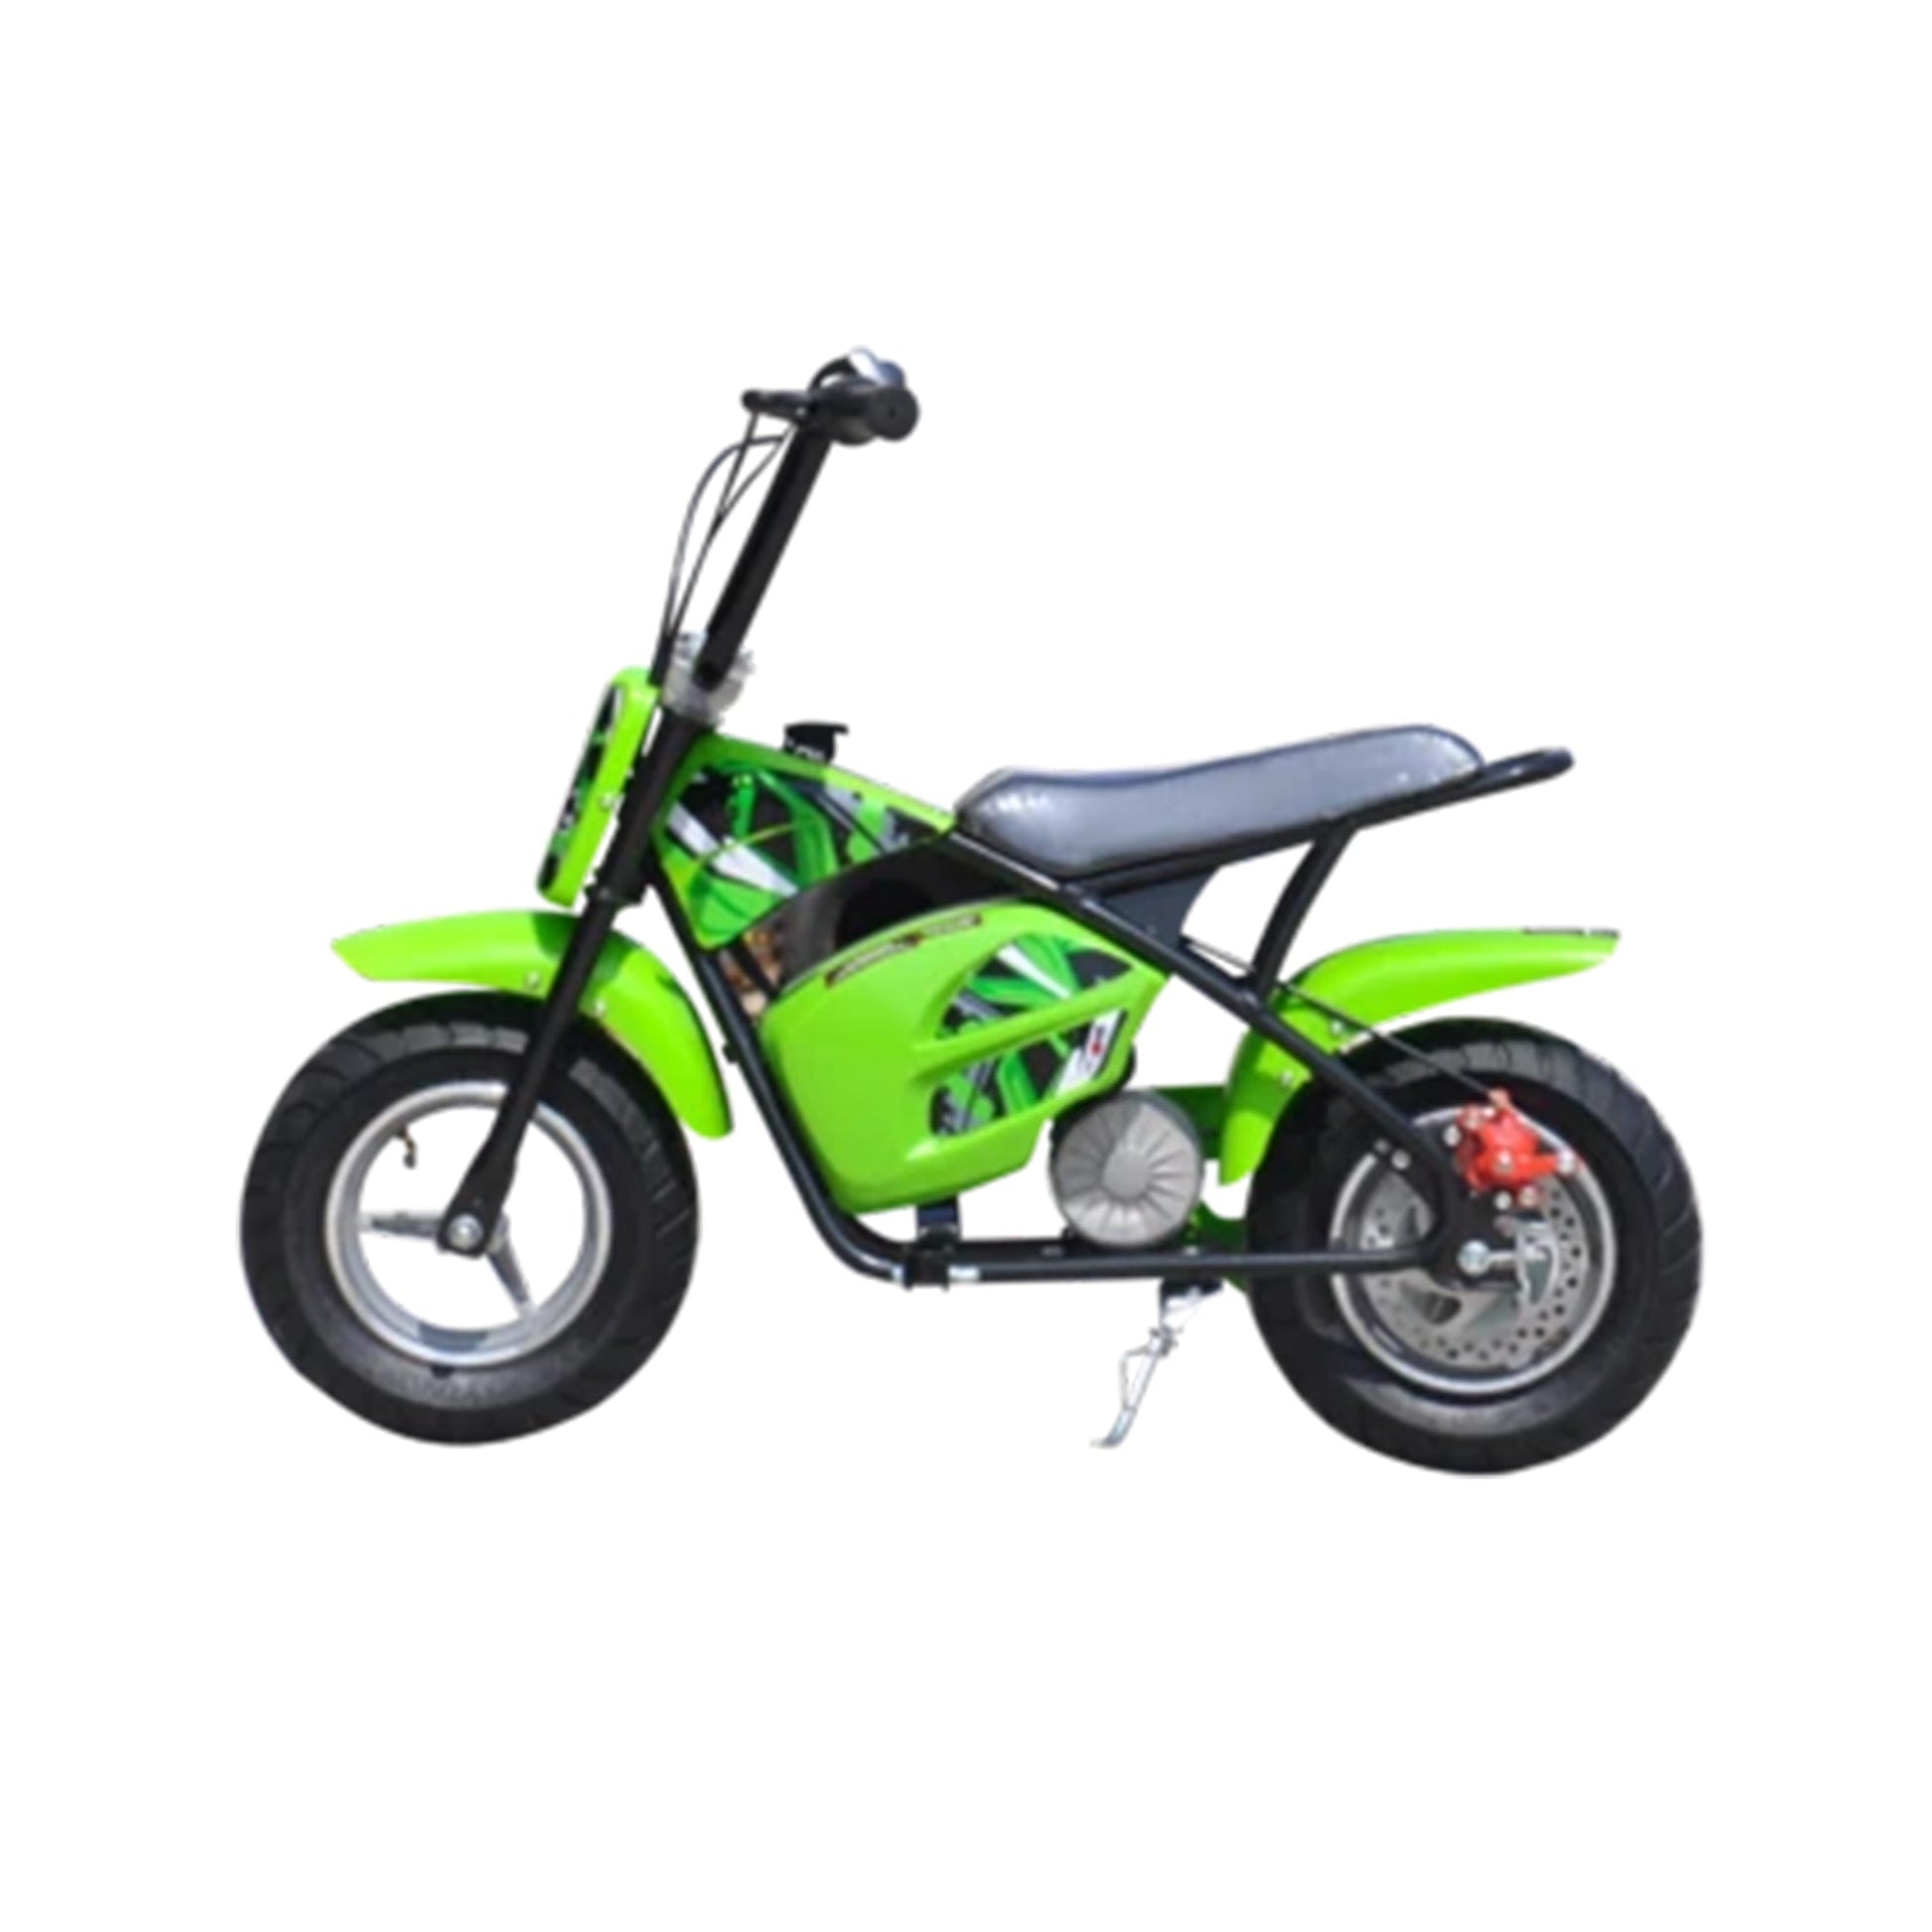 "Small green mini scrambler dirtbike for kids, electric ride on 250 watt 12 volt with brushless motor by Kids Dirt Bike on a white background."